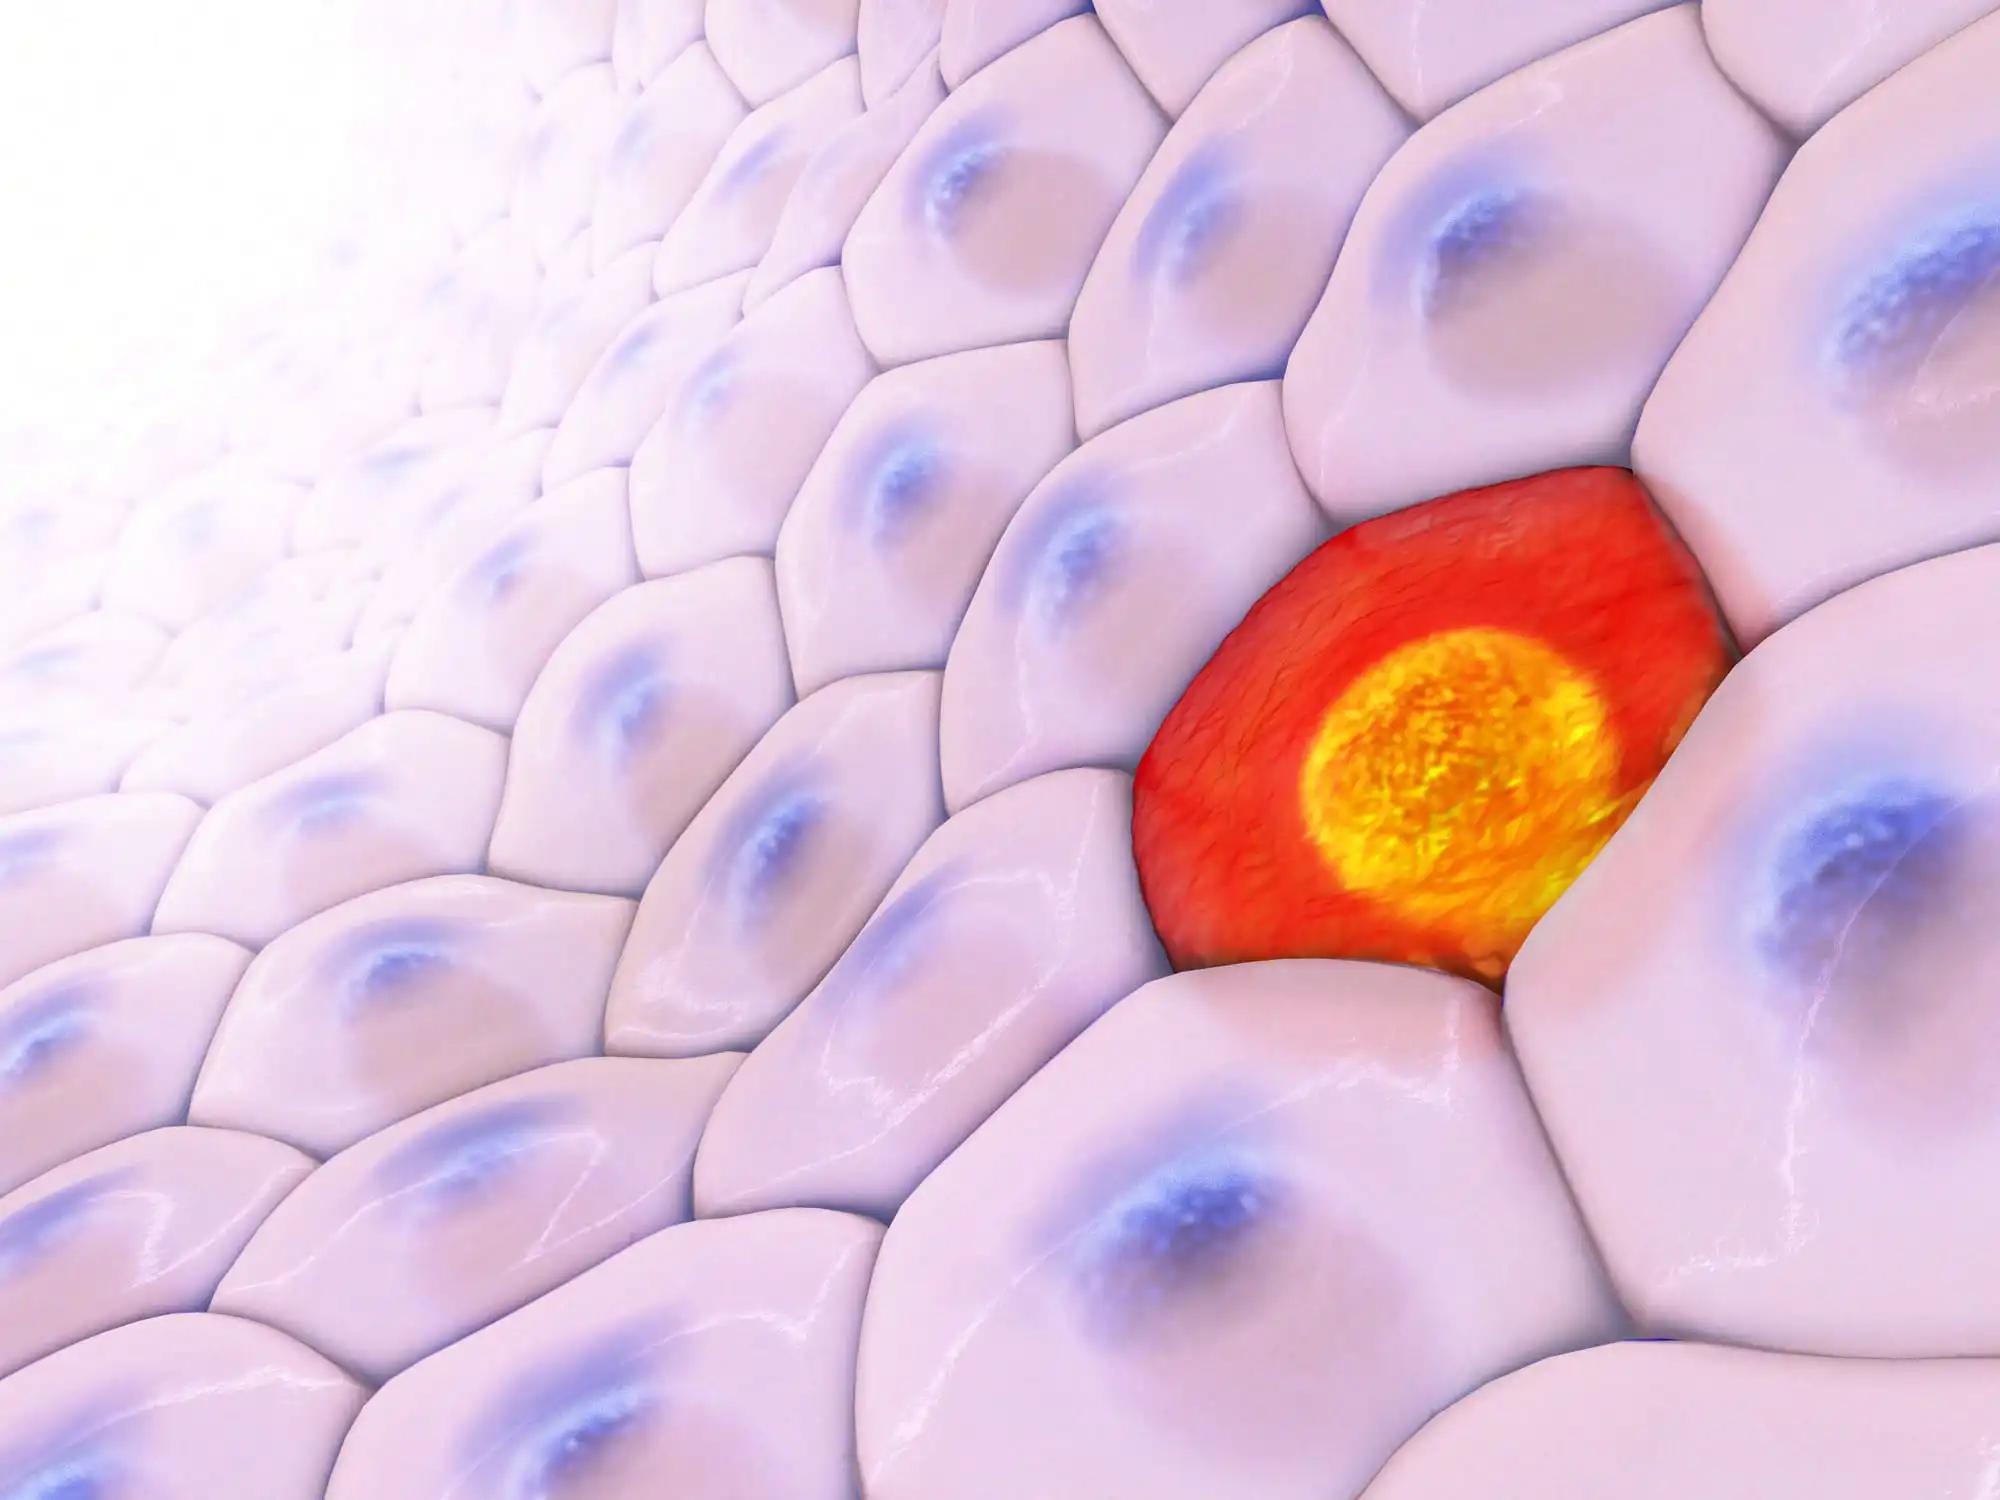 3d illustration of Frontal View on Cell Pattern With on Red Cell